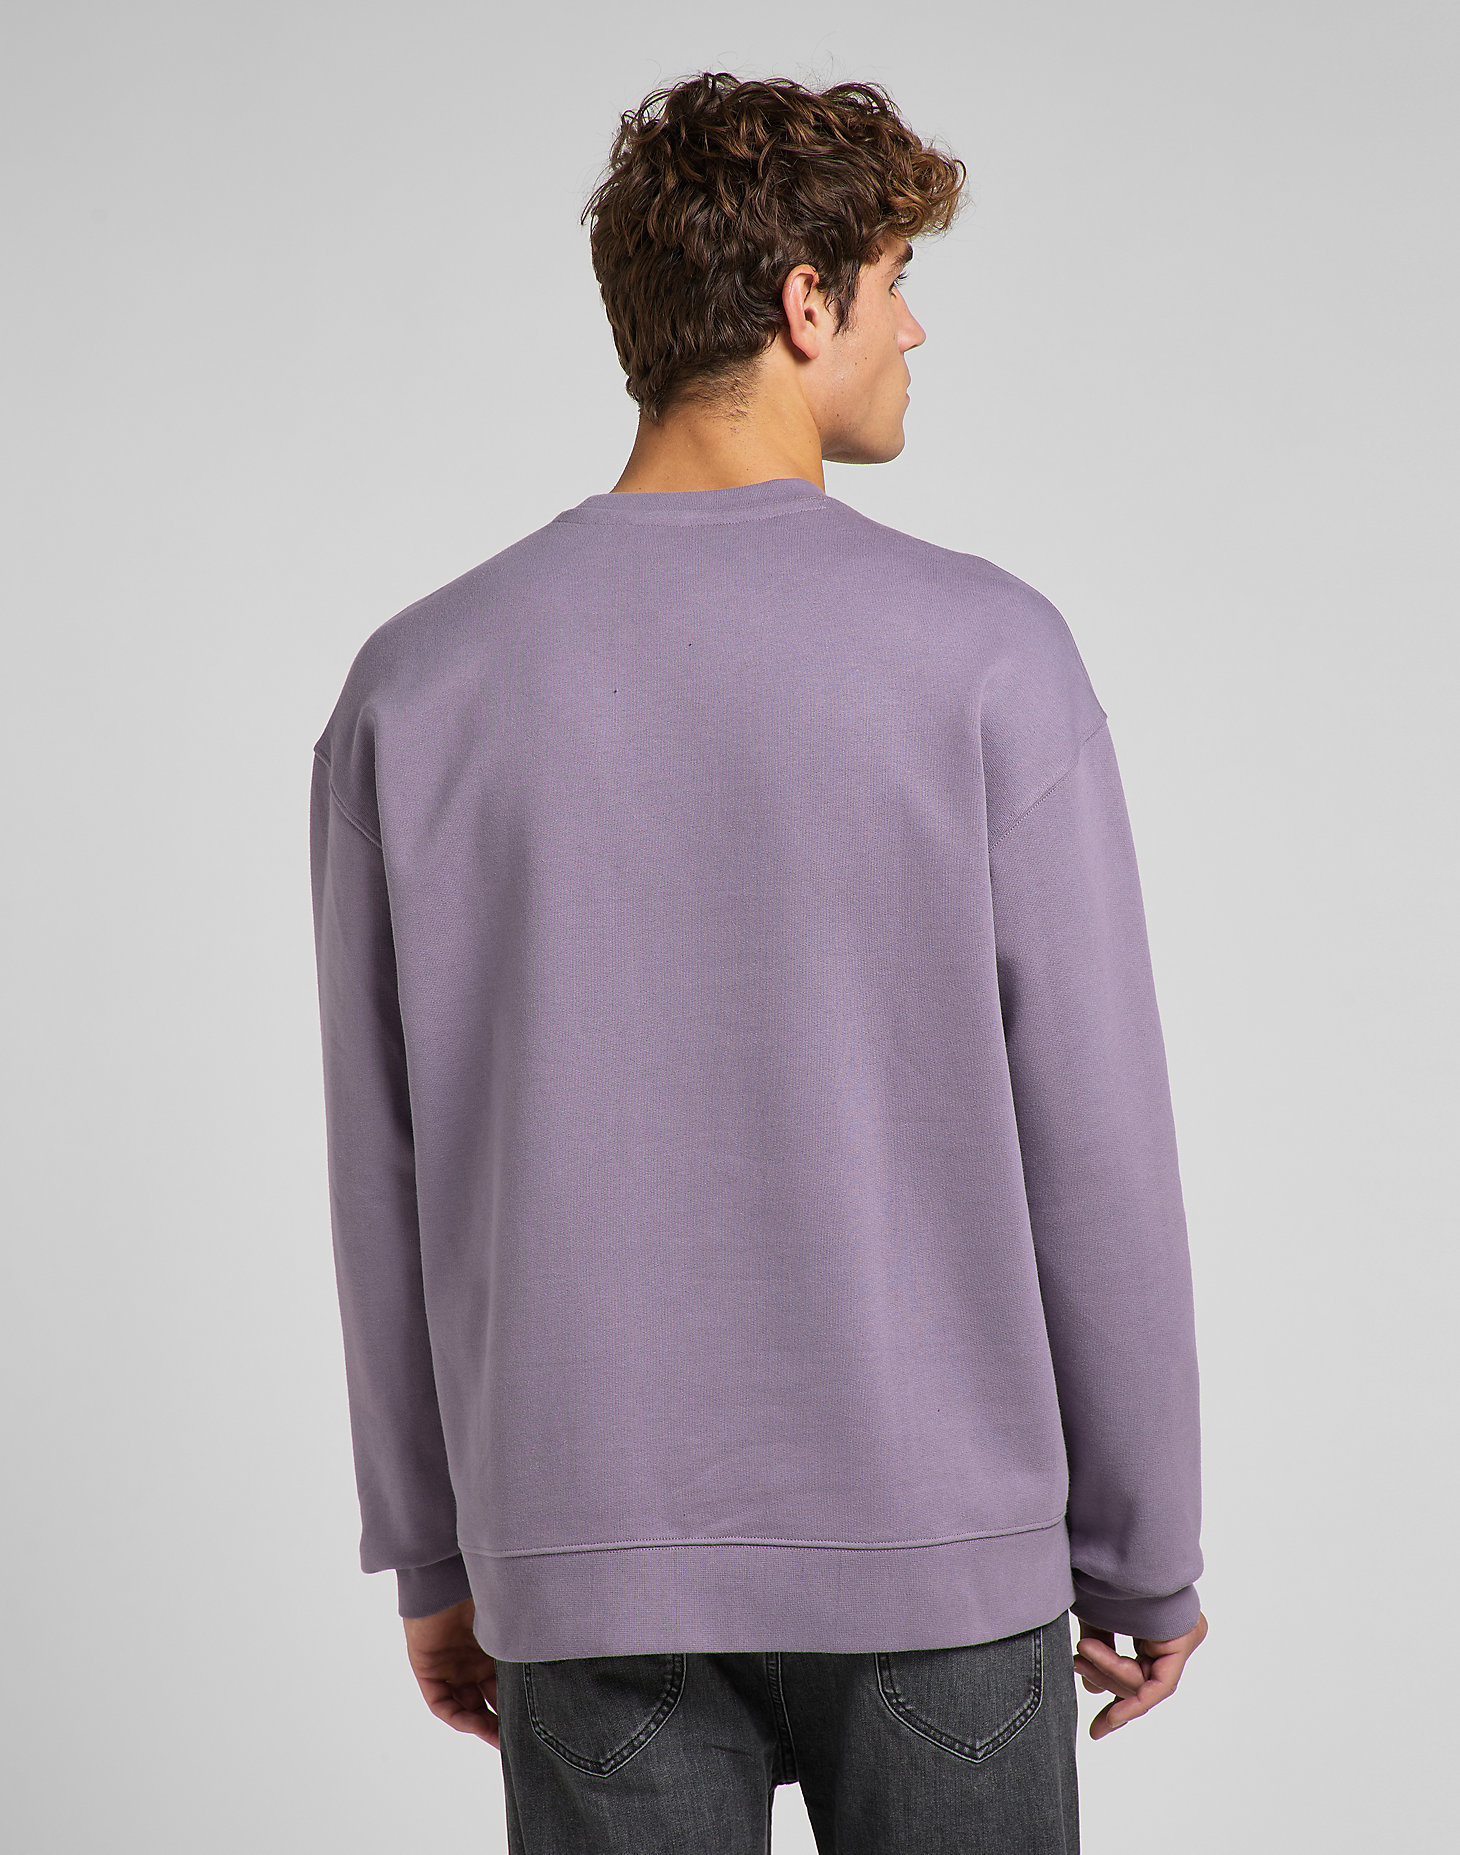 Core Loose Crew in Washed Purple alternative view 1